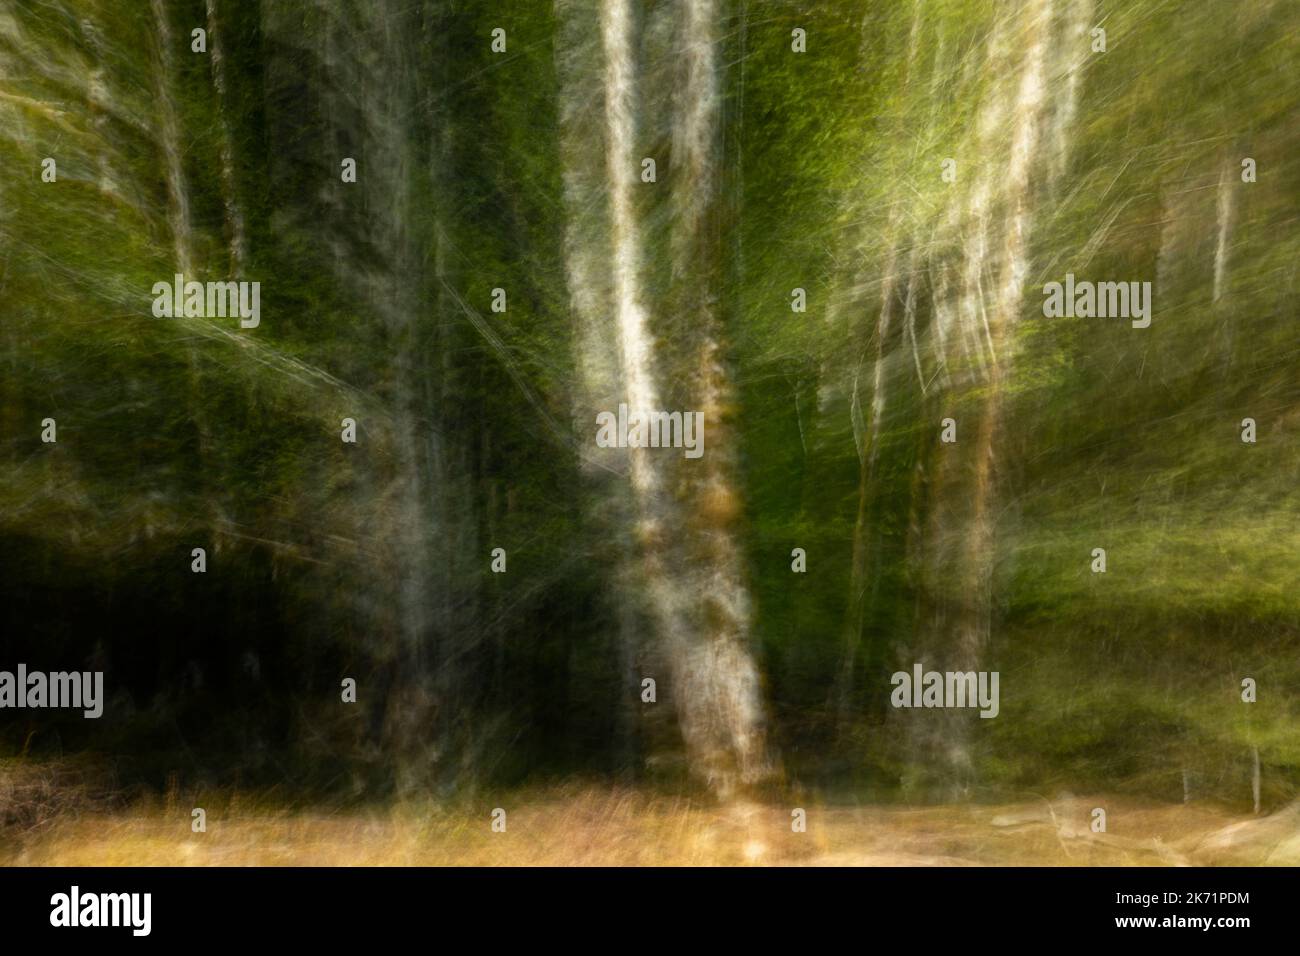 WA22313-00...WASHINGTON - Blurred image of trees in the Hoh Rain Forest of Olympic National Park. Stock Photo